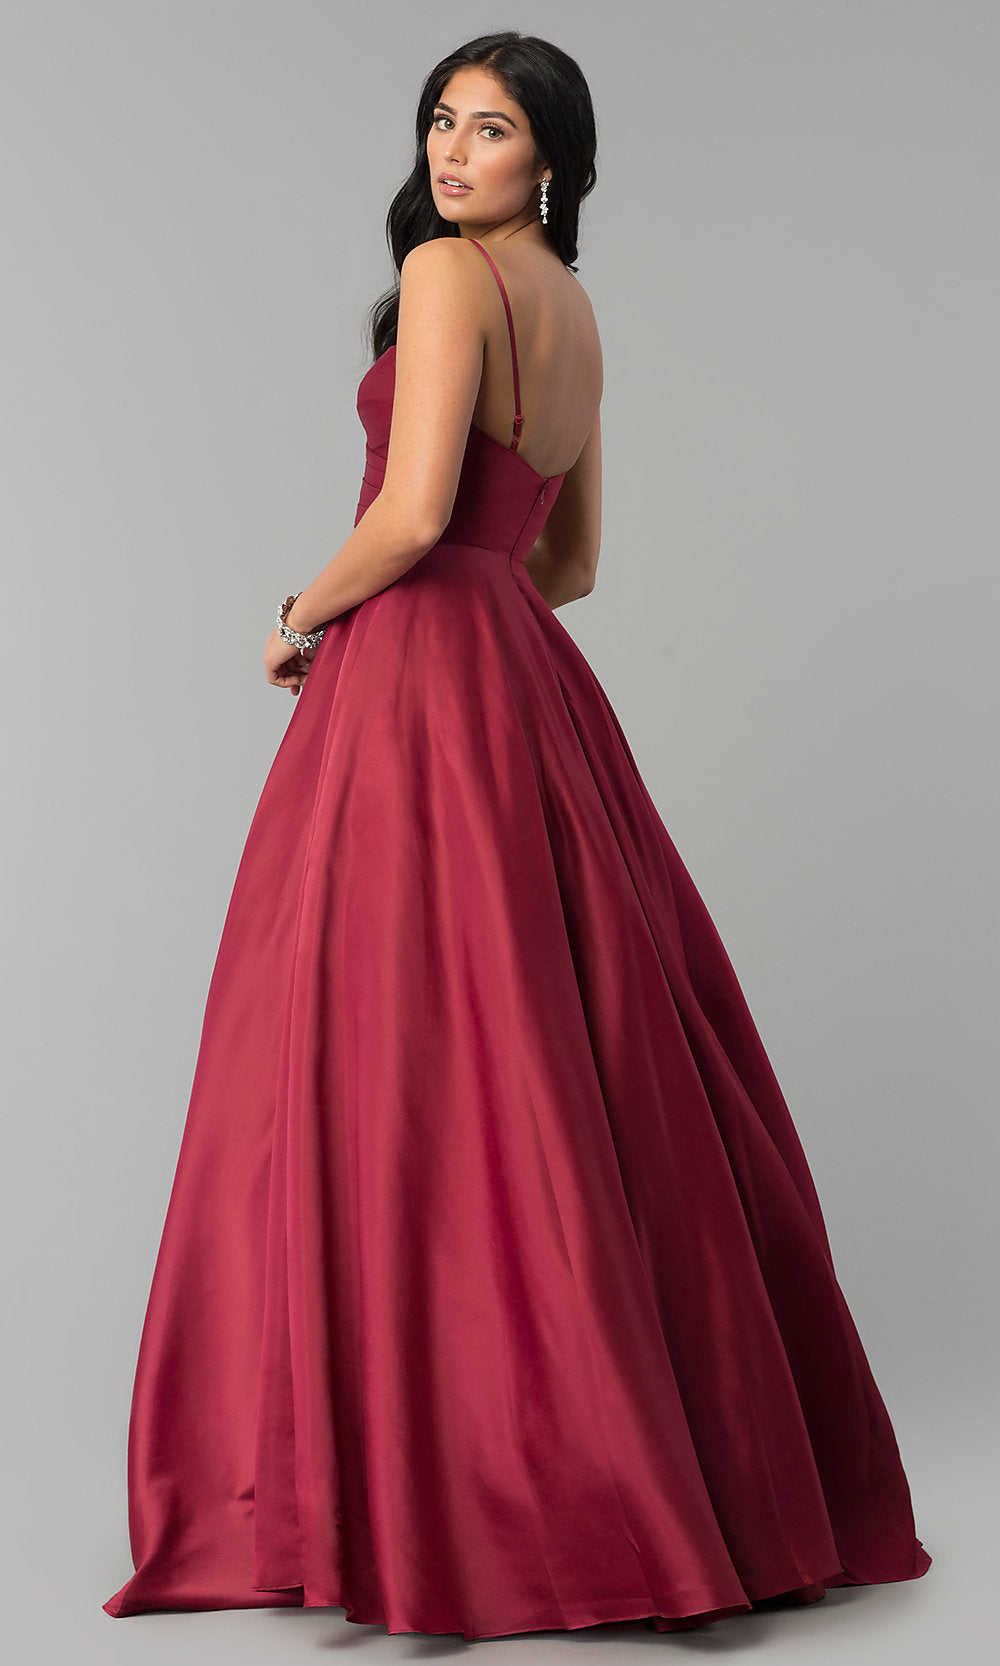  Pleated-Bodice Long Classic Formal Ball Gown